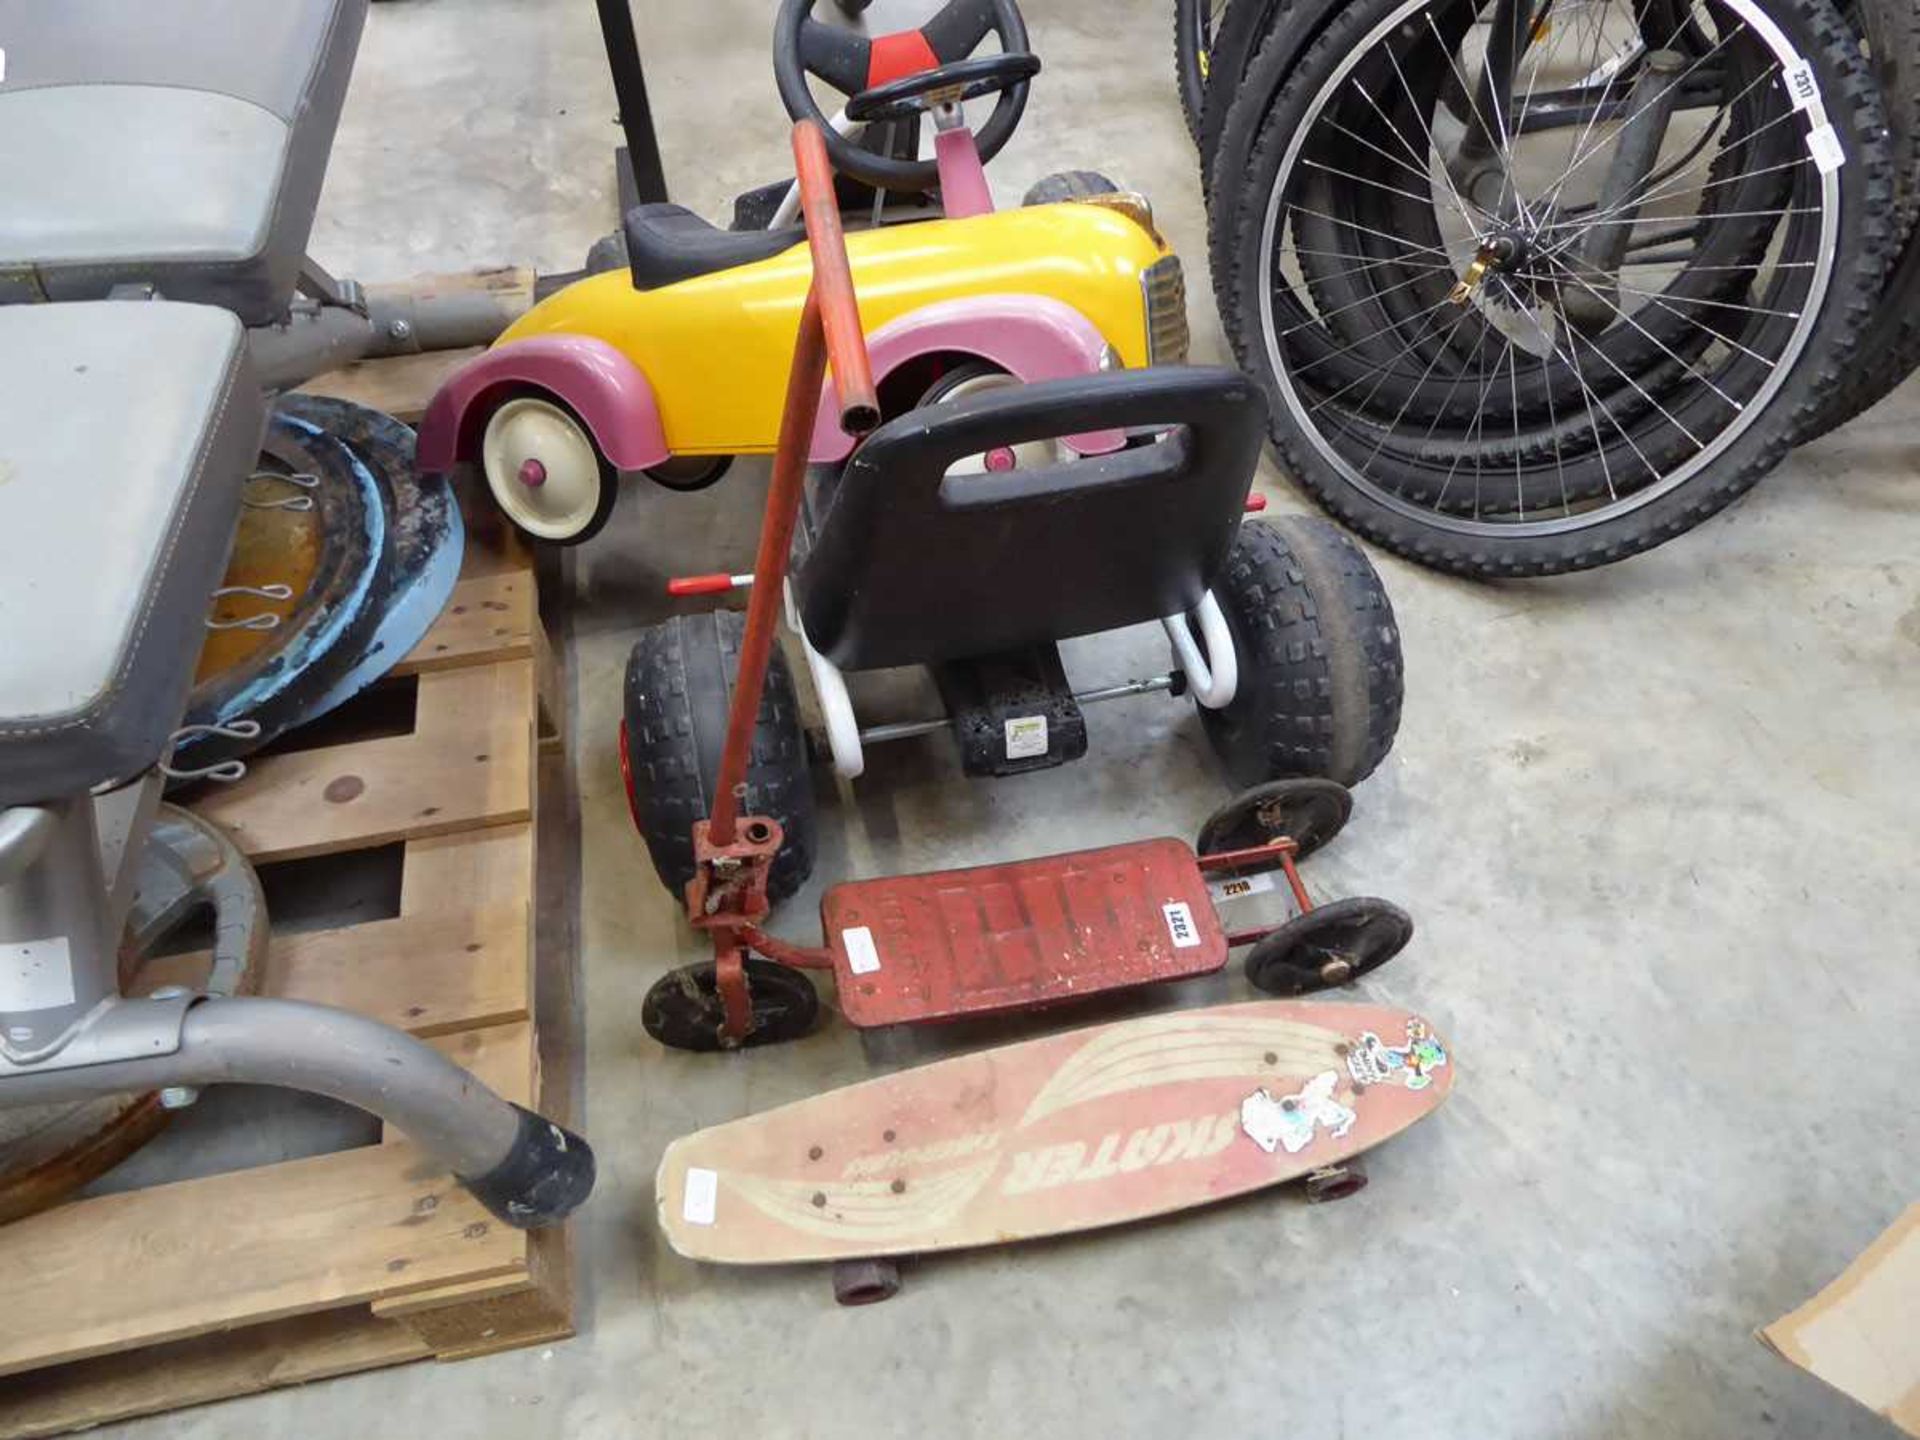 Vintage metal 3 wheeled scooter together with a skateboard